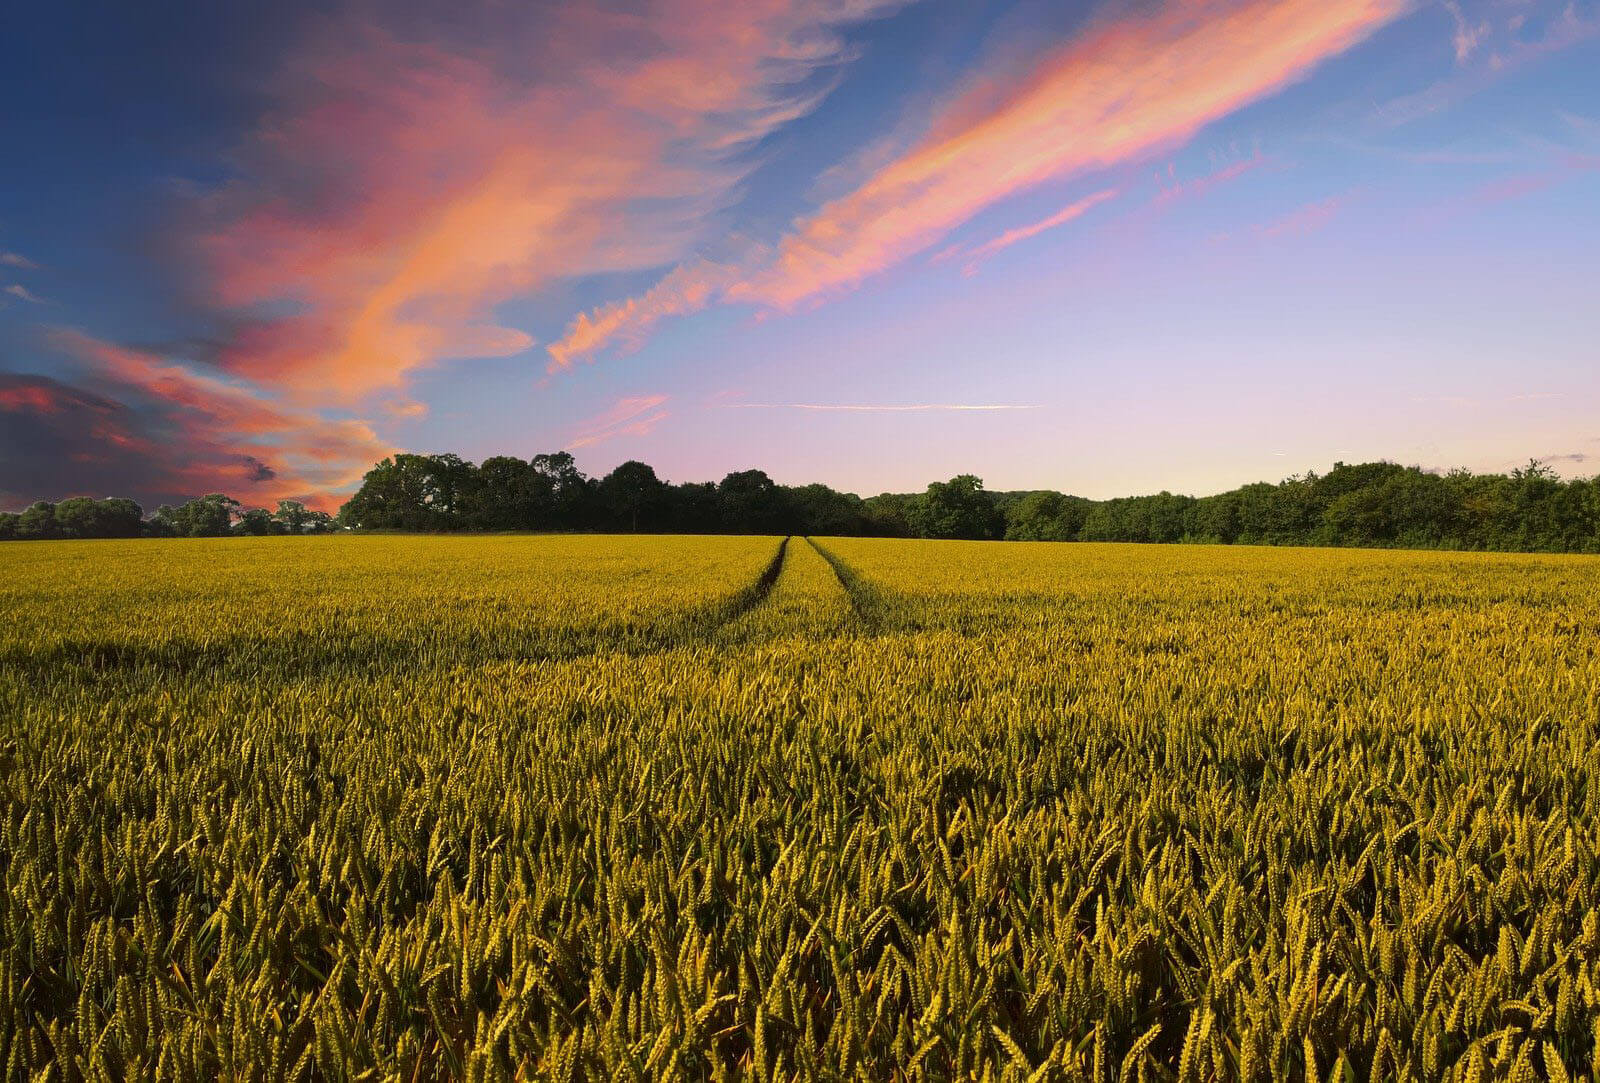 Photograph of wheat field at dusk